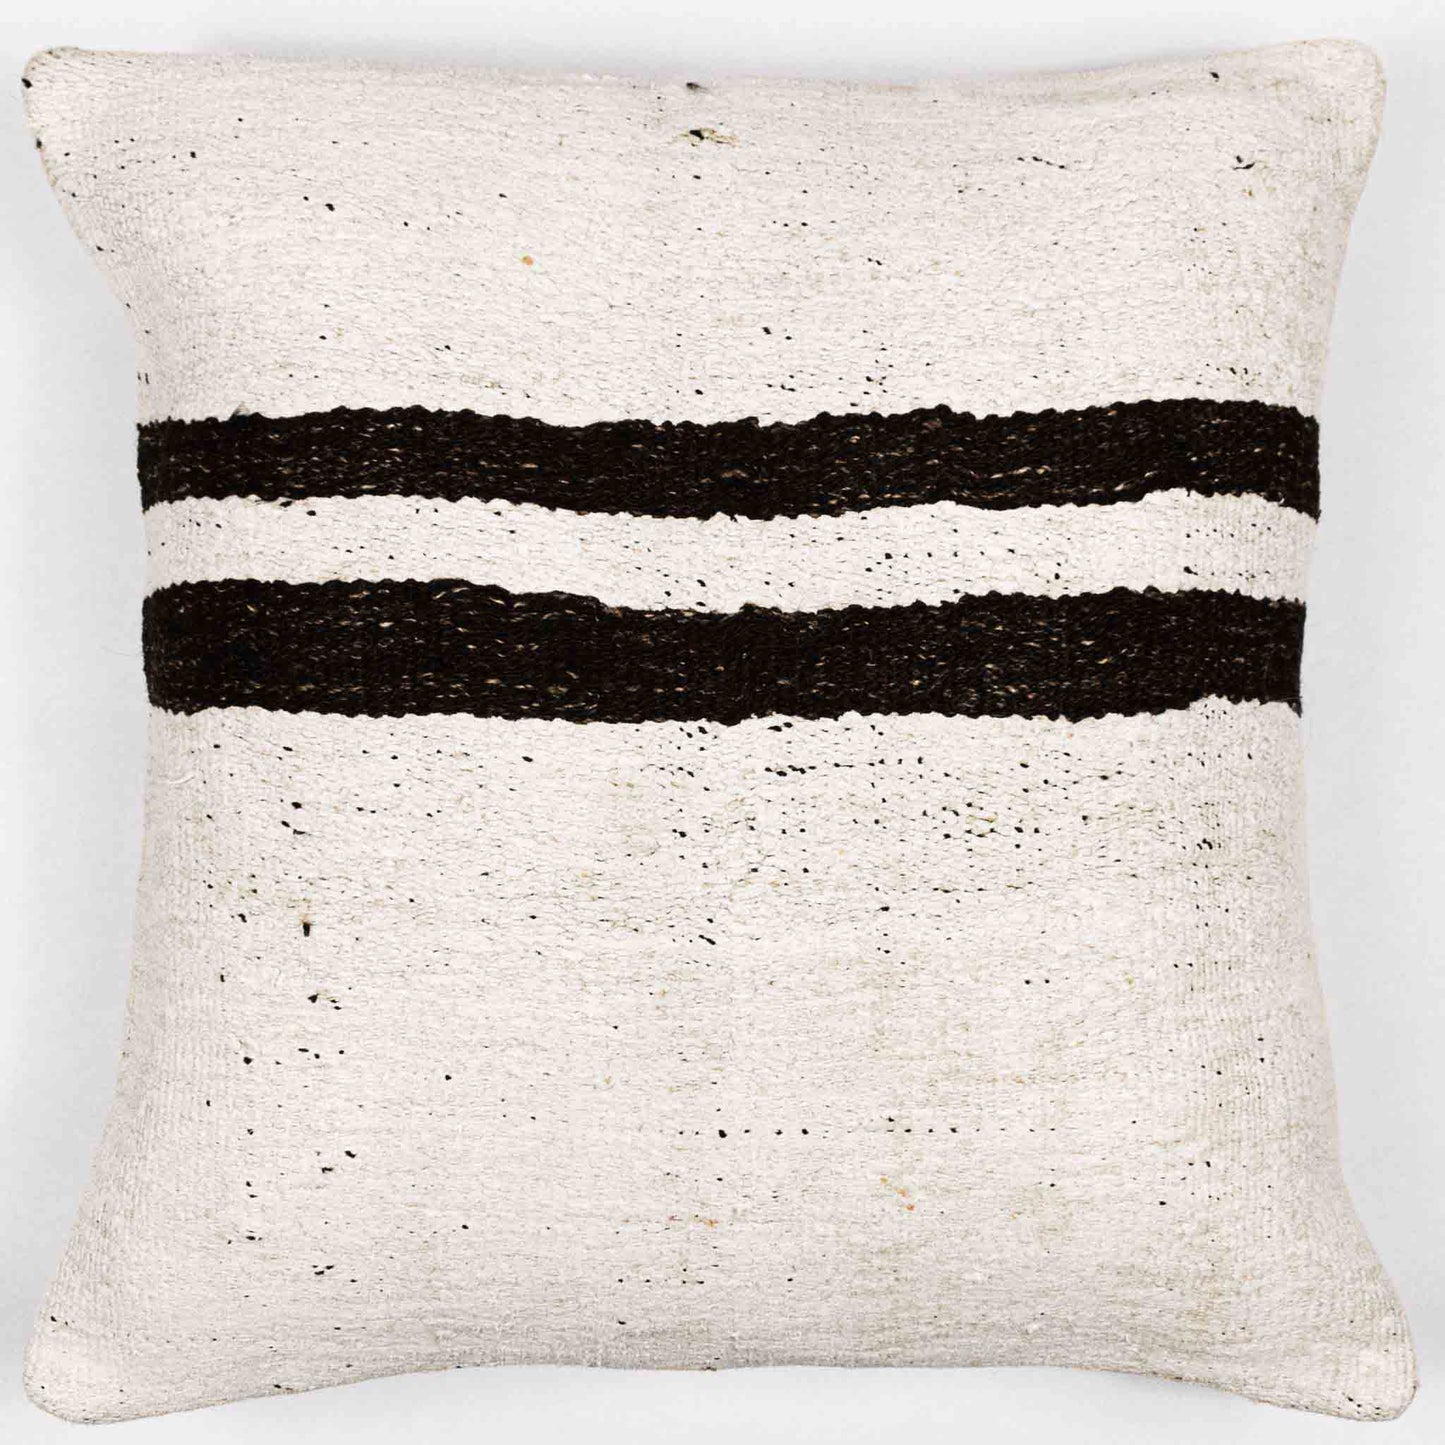 Handwoven Turkish kilim sisal pillow cover in cream with double brown stripe.